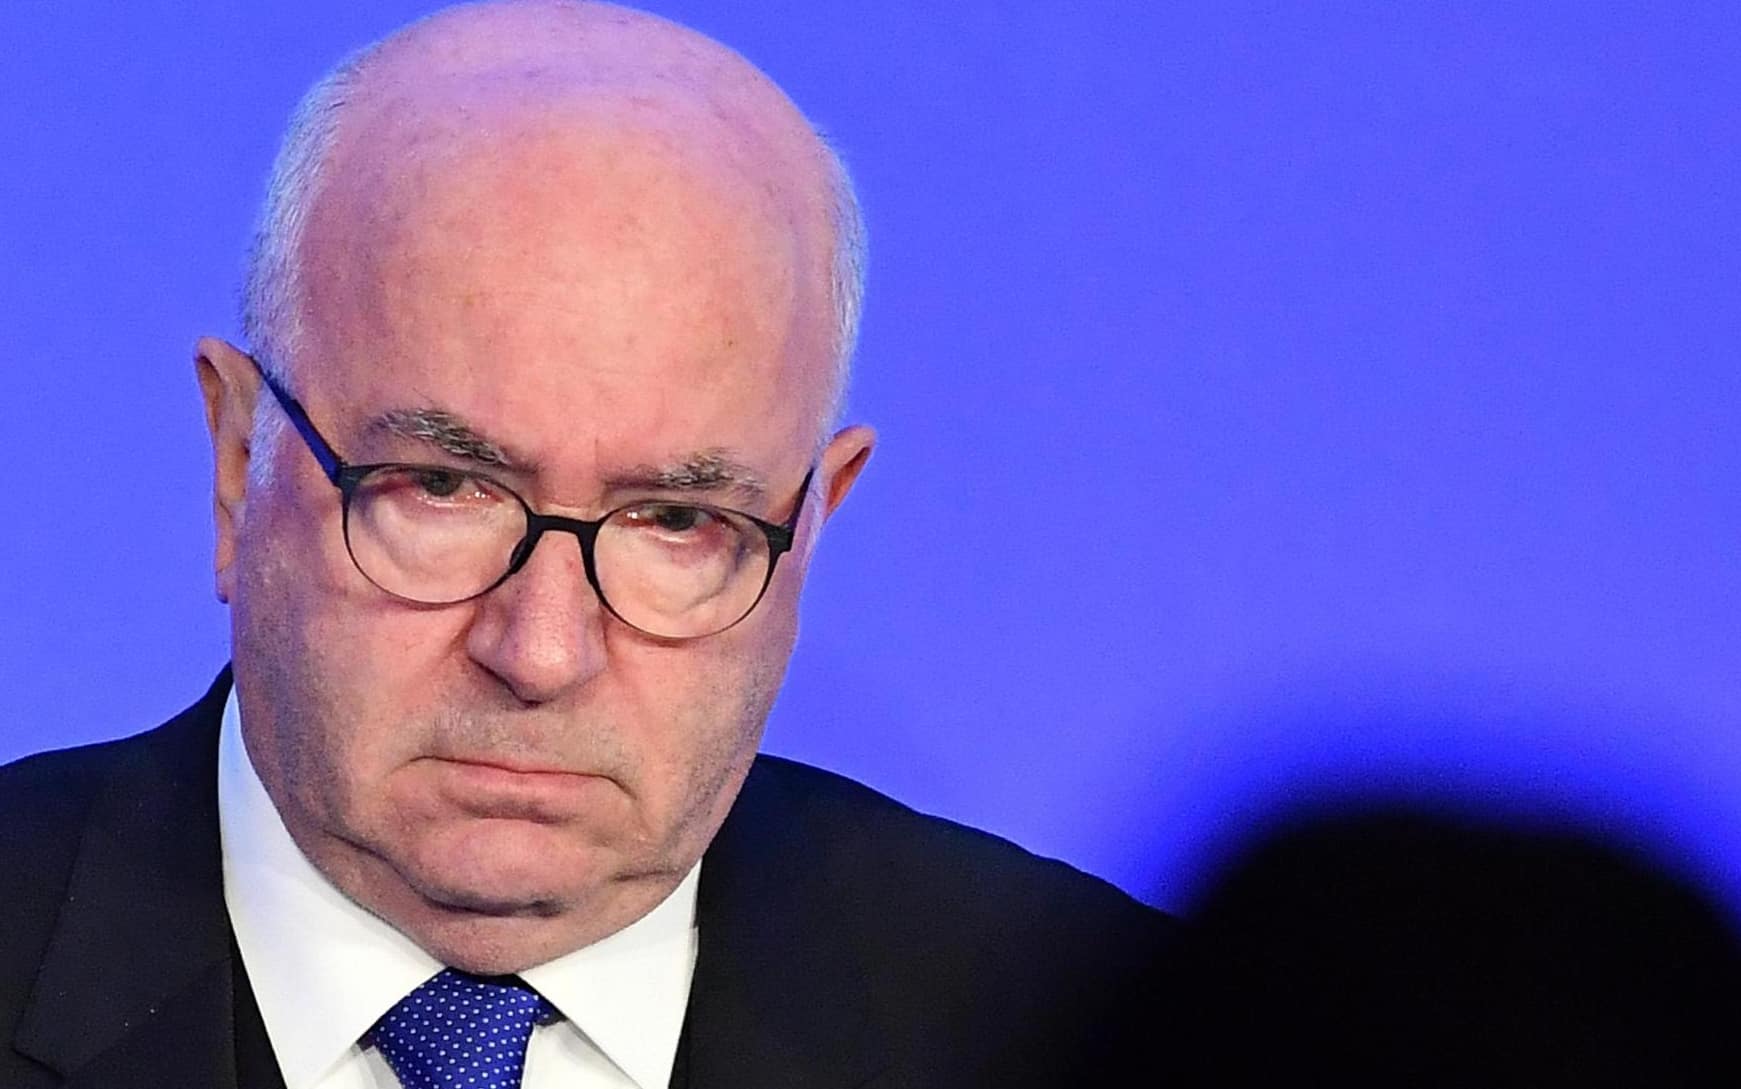 Carlo Tavecchio talks during Figc conference in  Rome, 29 January 2018. The leaders of the FIGC (Italian Football Federation) meet to elect the new president.   ANSA/ETTORE FERRARI








